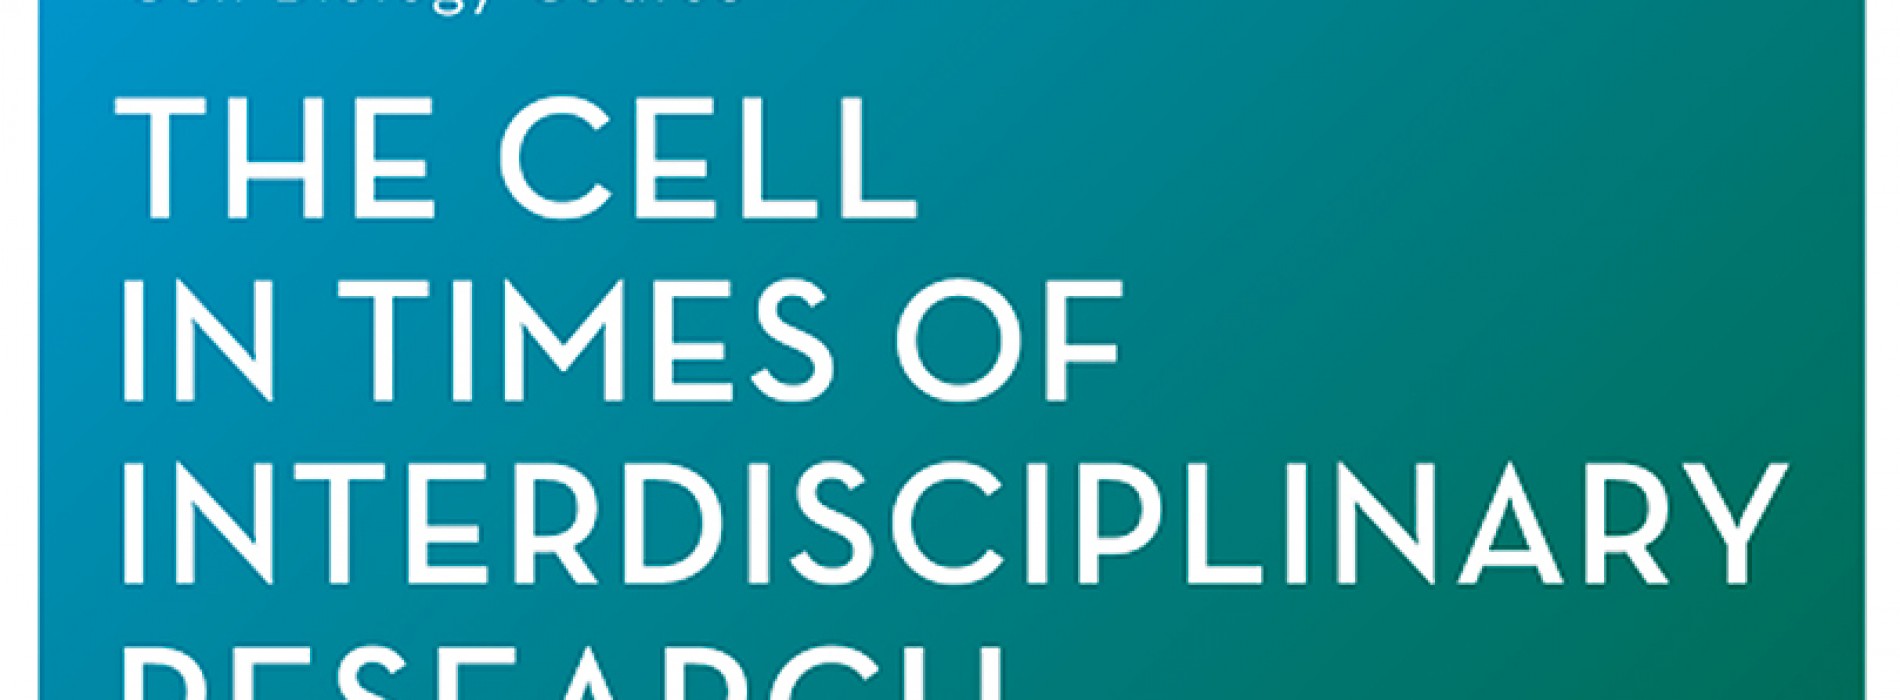 Extended the date of nomination to the 13 of December-CELL BIOLOGY IN TIMES OF INTERDISCIPLINARY RESEARCH